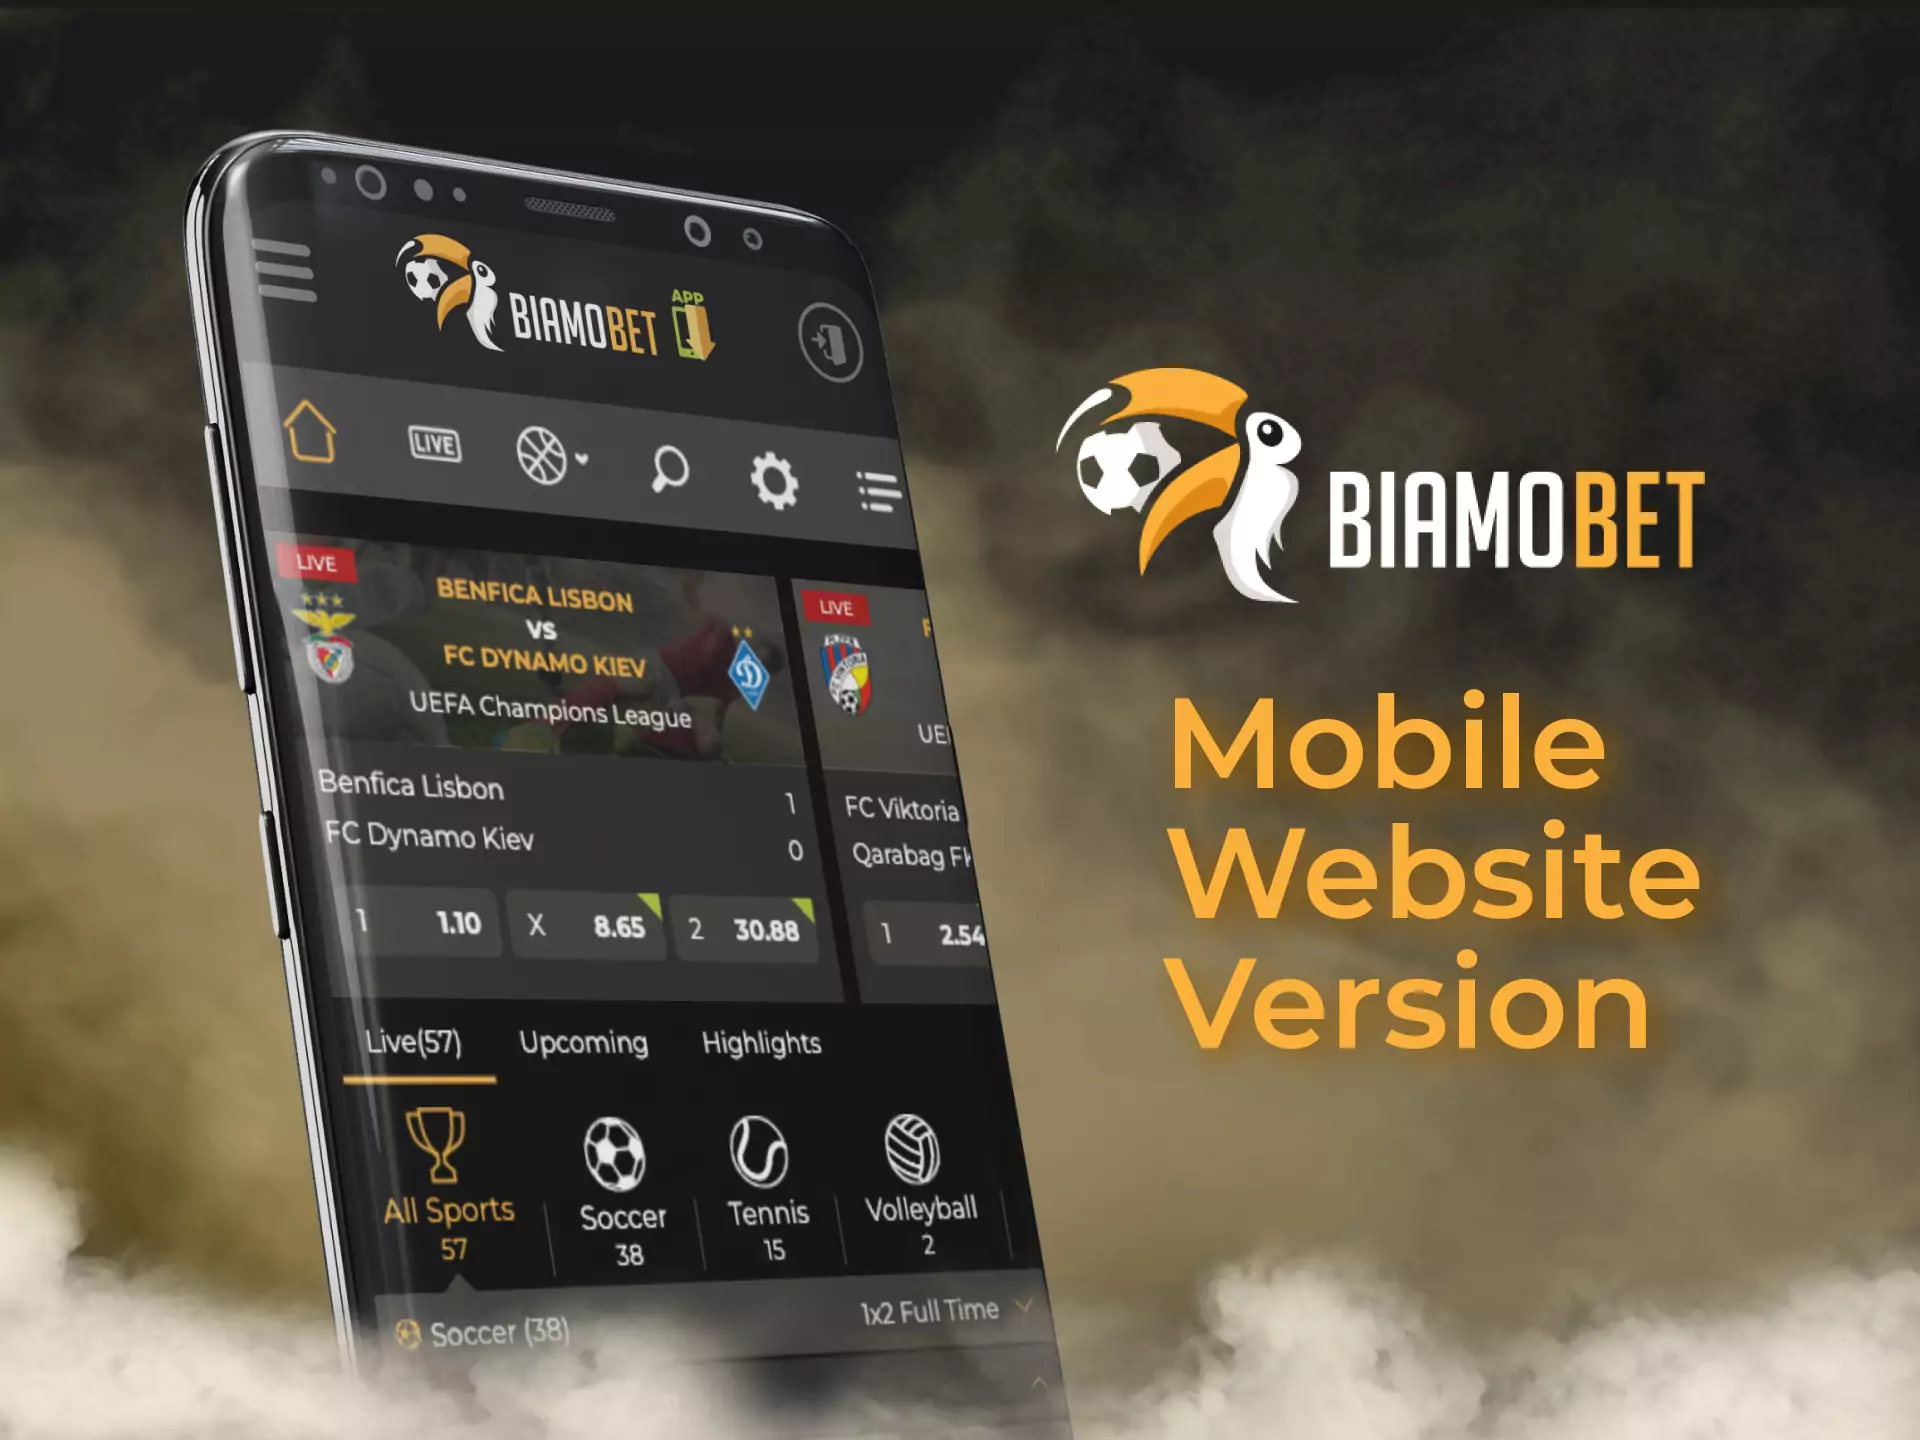 Besides the Biamobet app, you can place bets on the mobile site version.